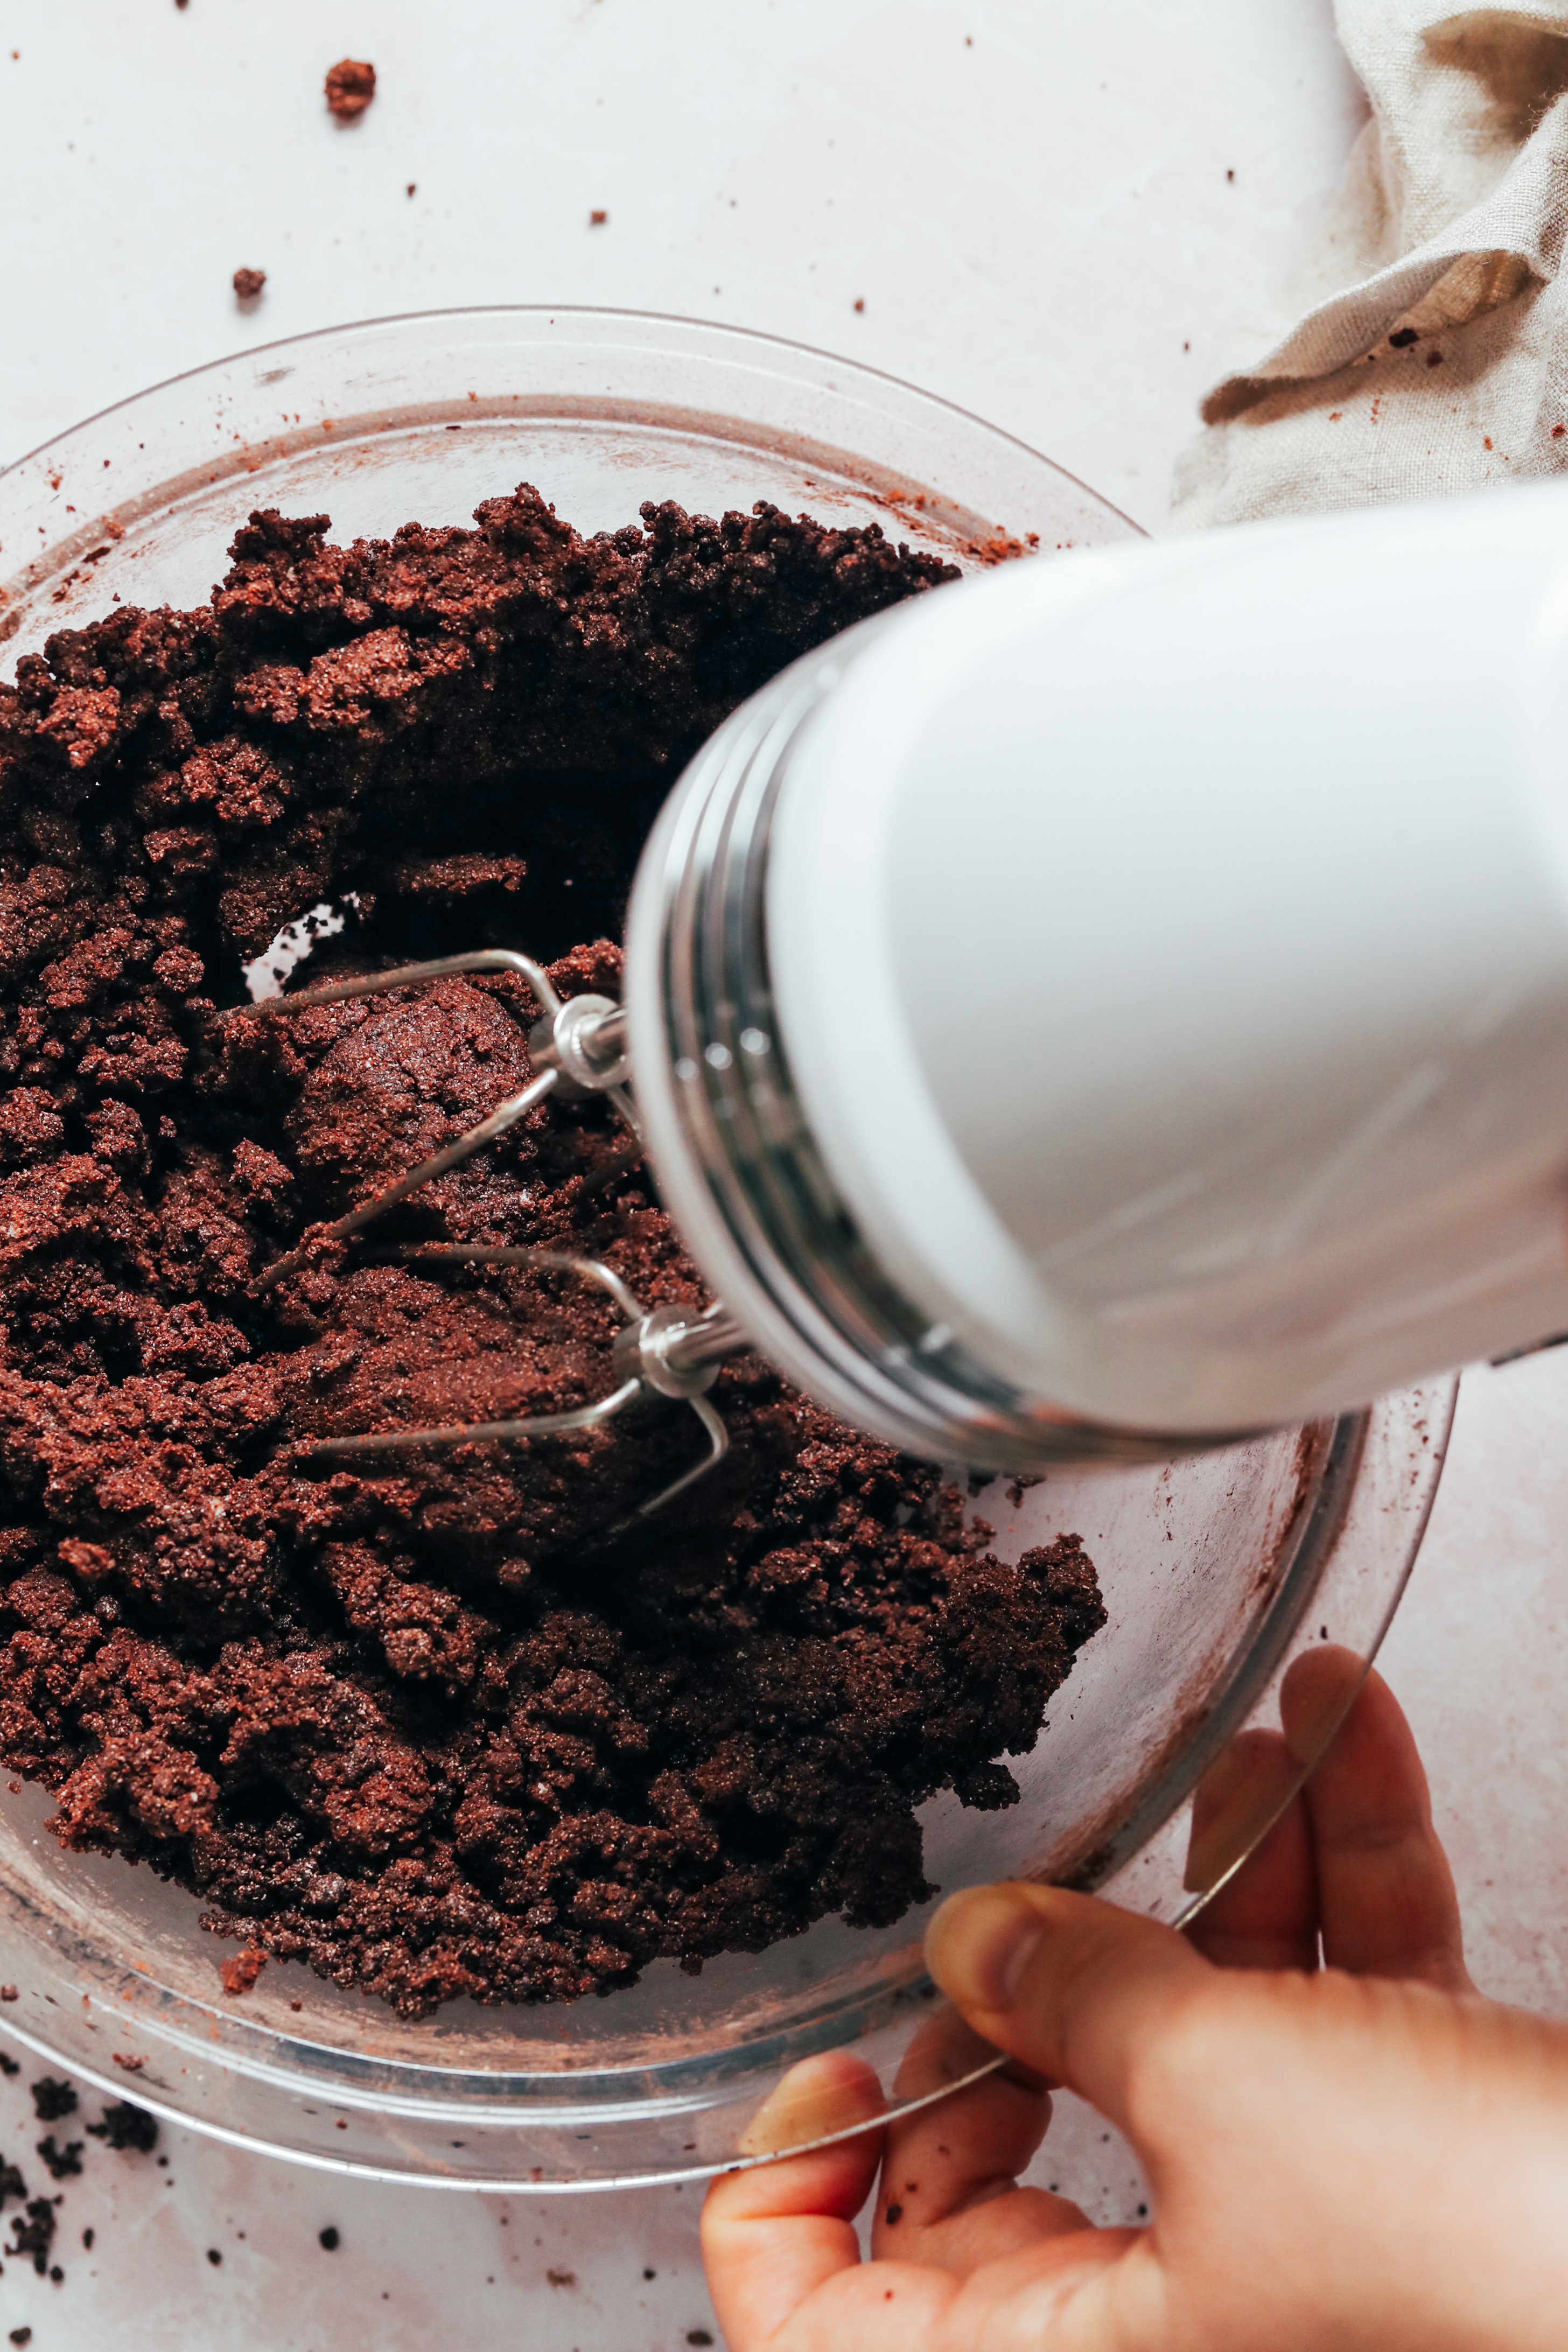 Using a hand mixer to mix a chocolate cookie dough